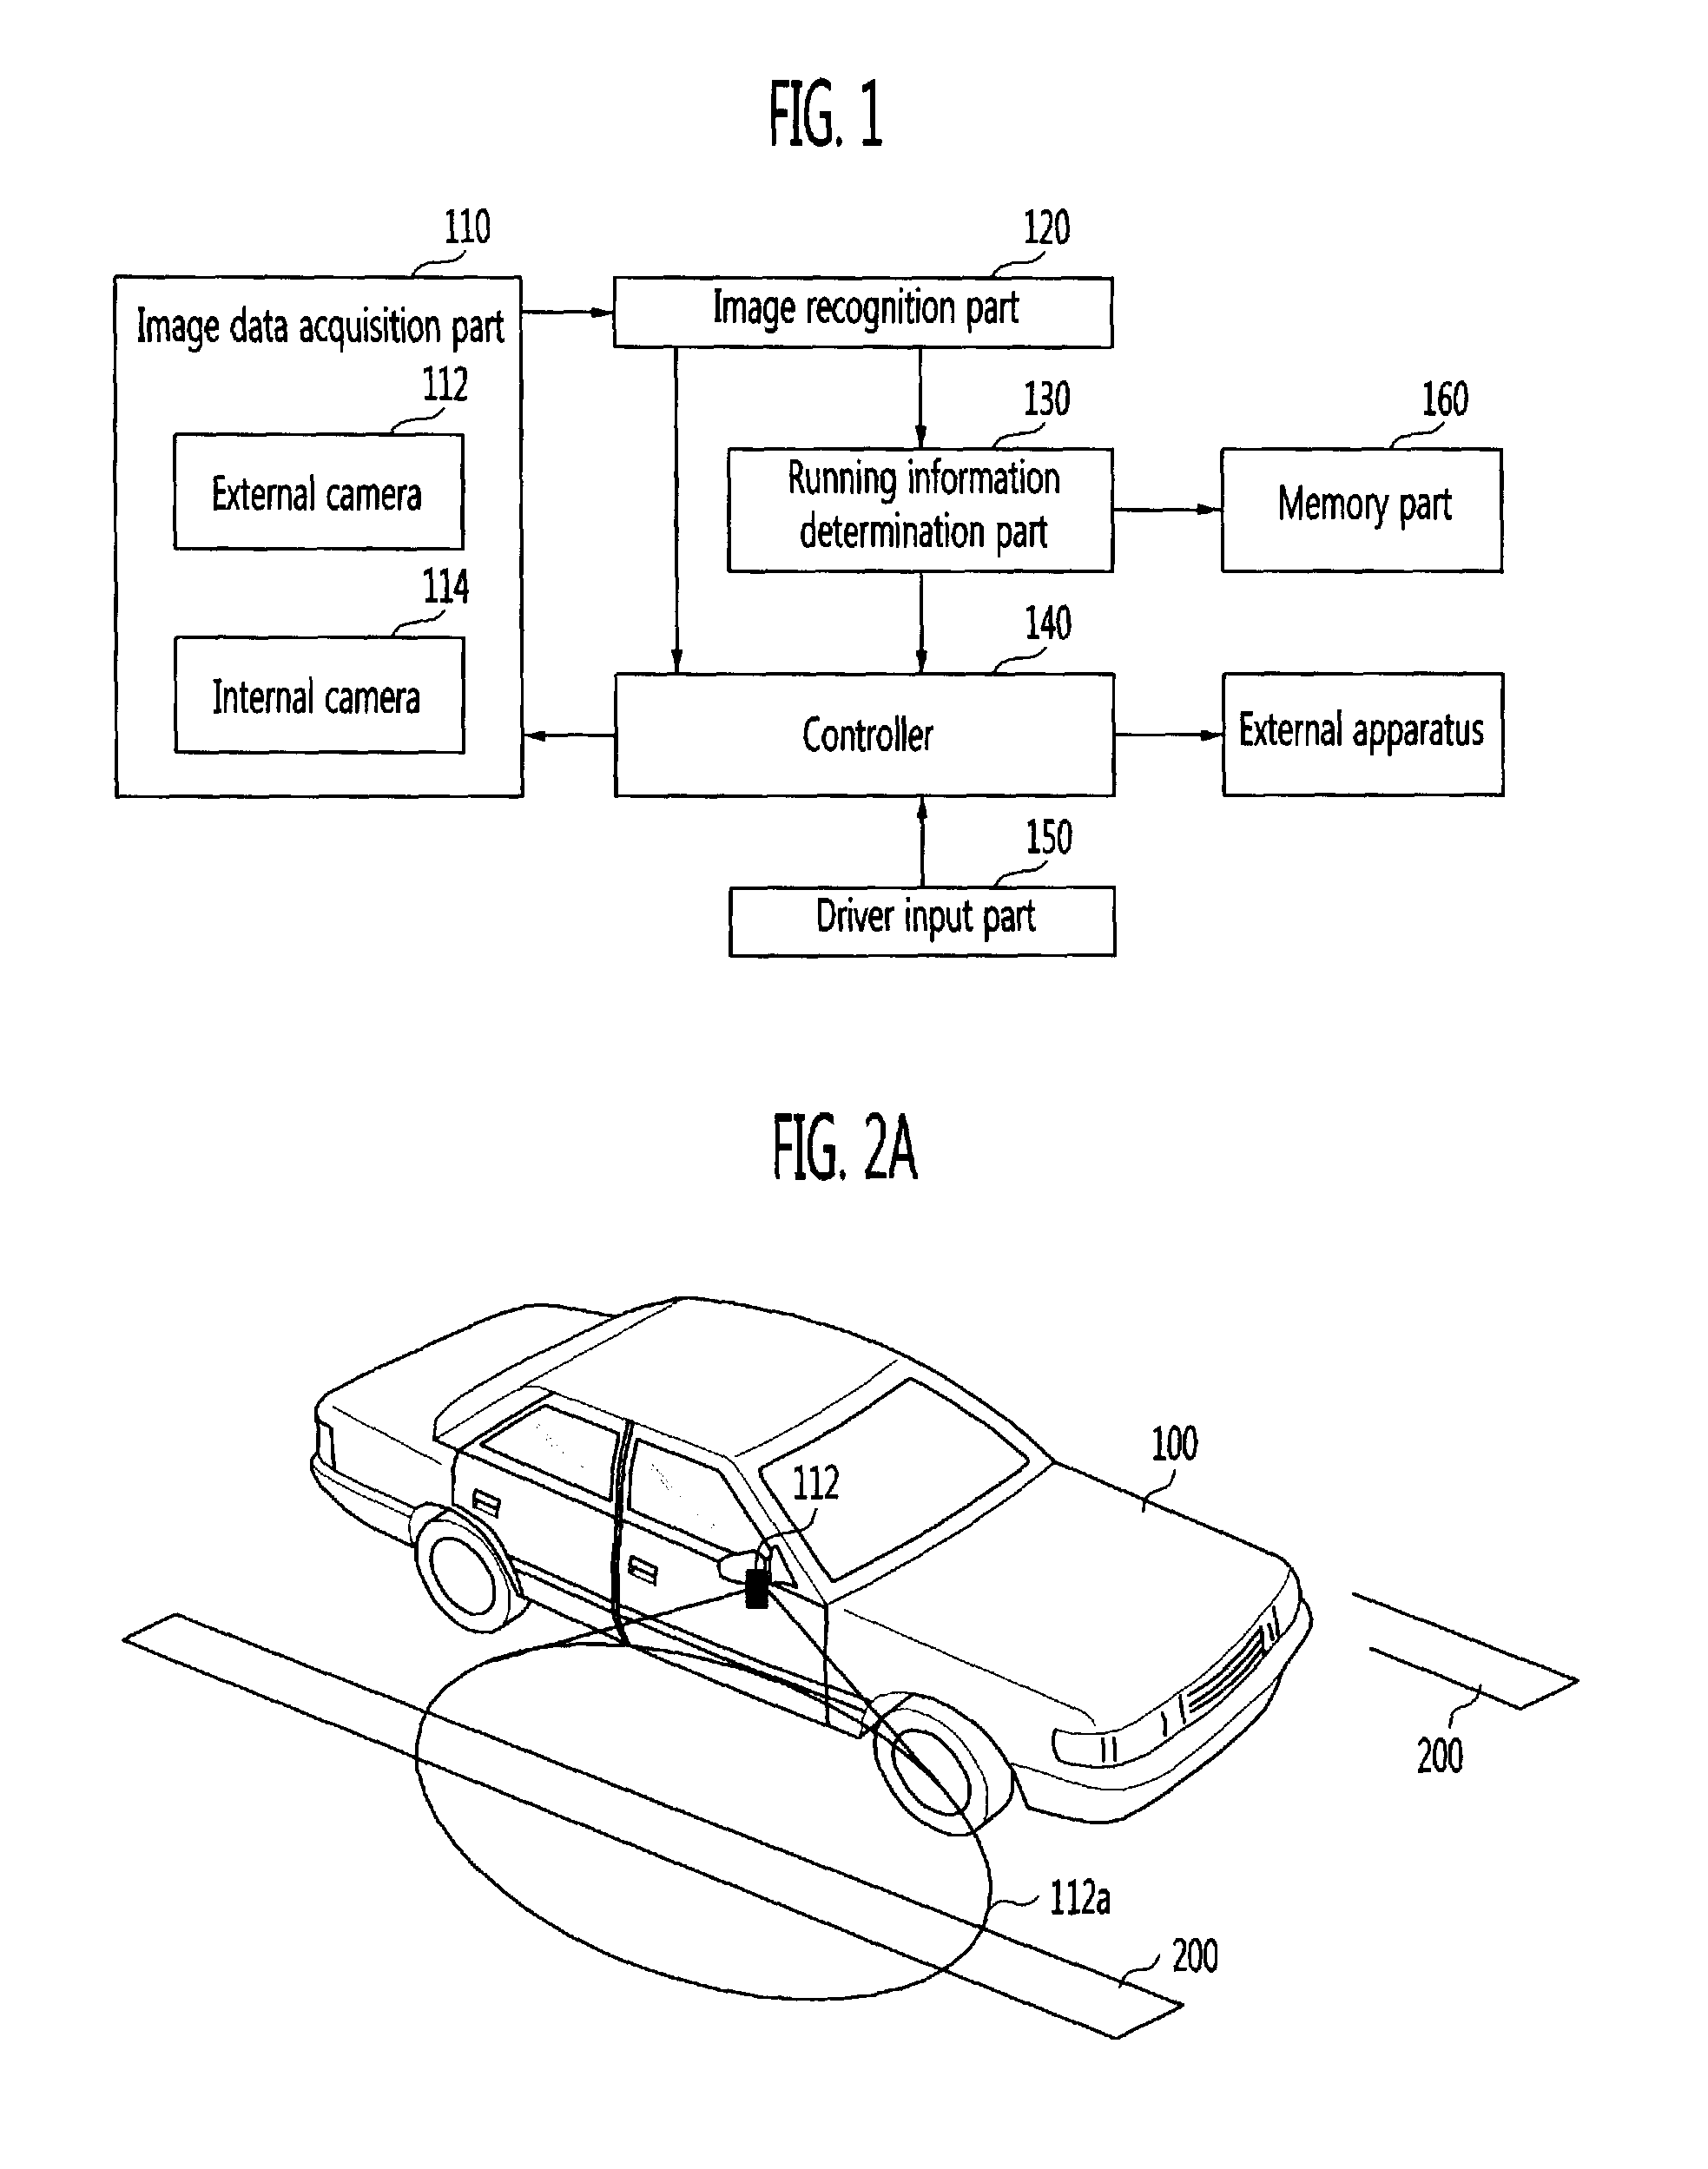 Apparatus and method for preventing collision of vehicle